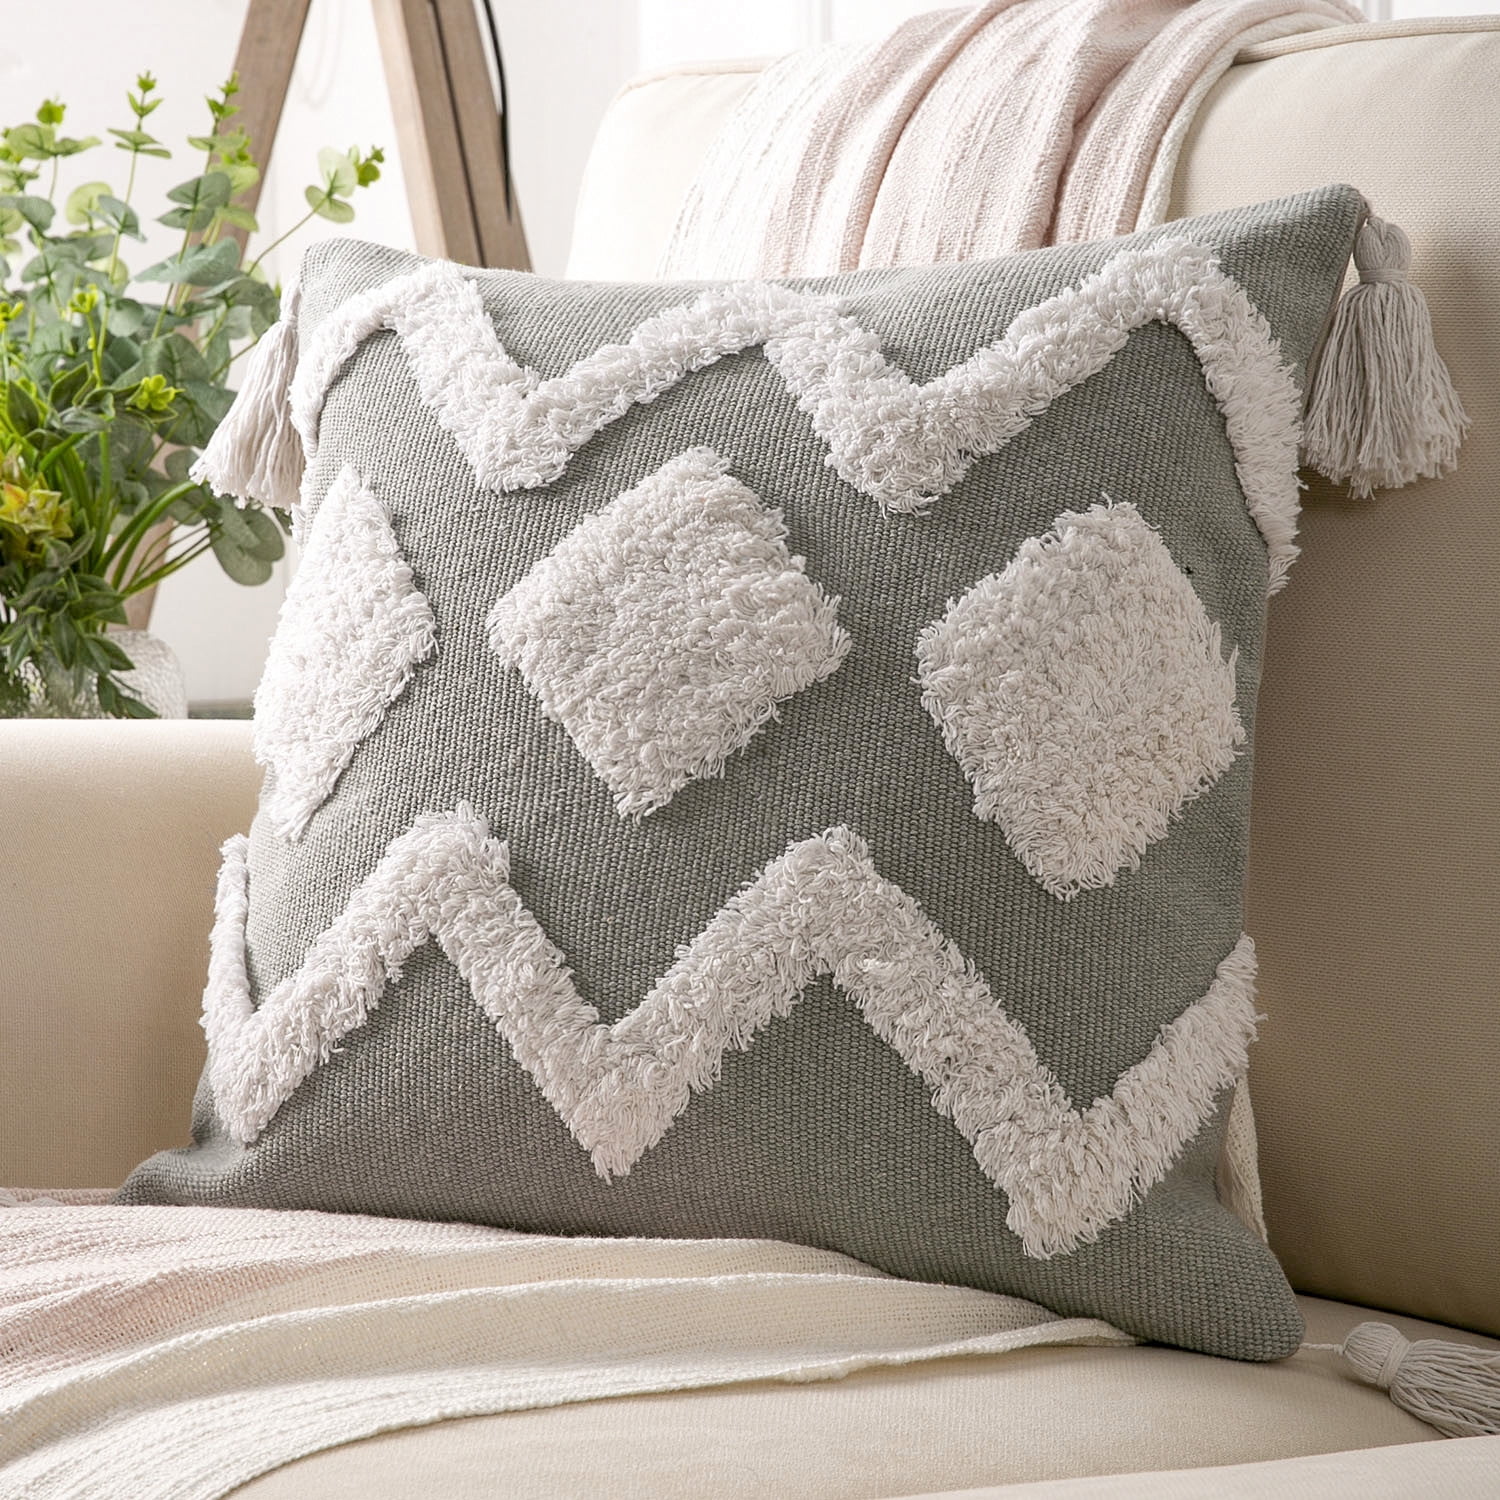 Merrycolor White Grey Boho Pillow Covers 20x20 with Tassels Tufted  Decorative Gray Throw Pillows Neutral Modern Accent Pillowcase Farmhouse  Square